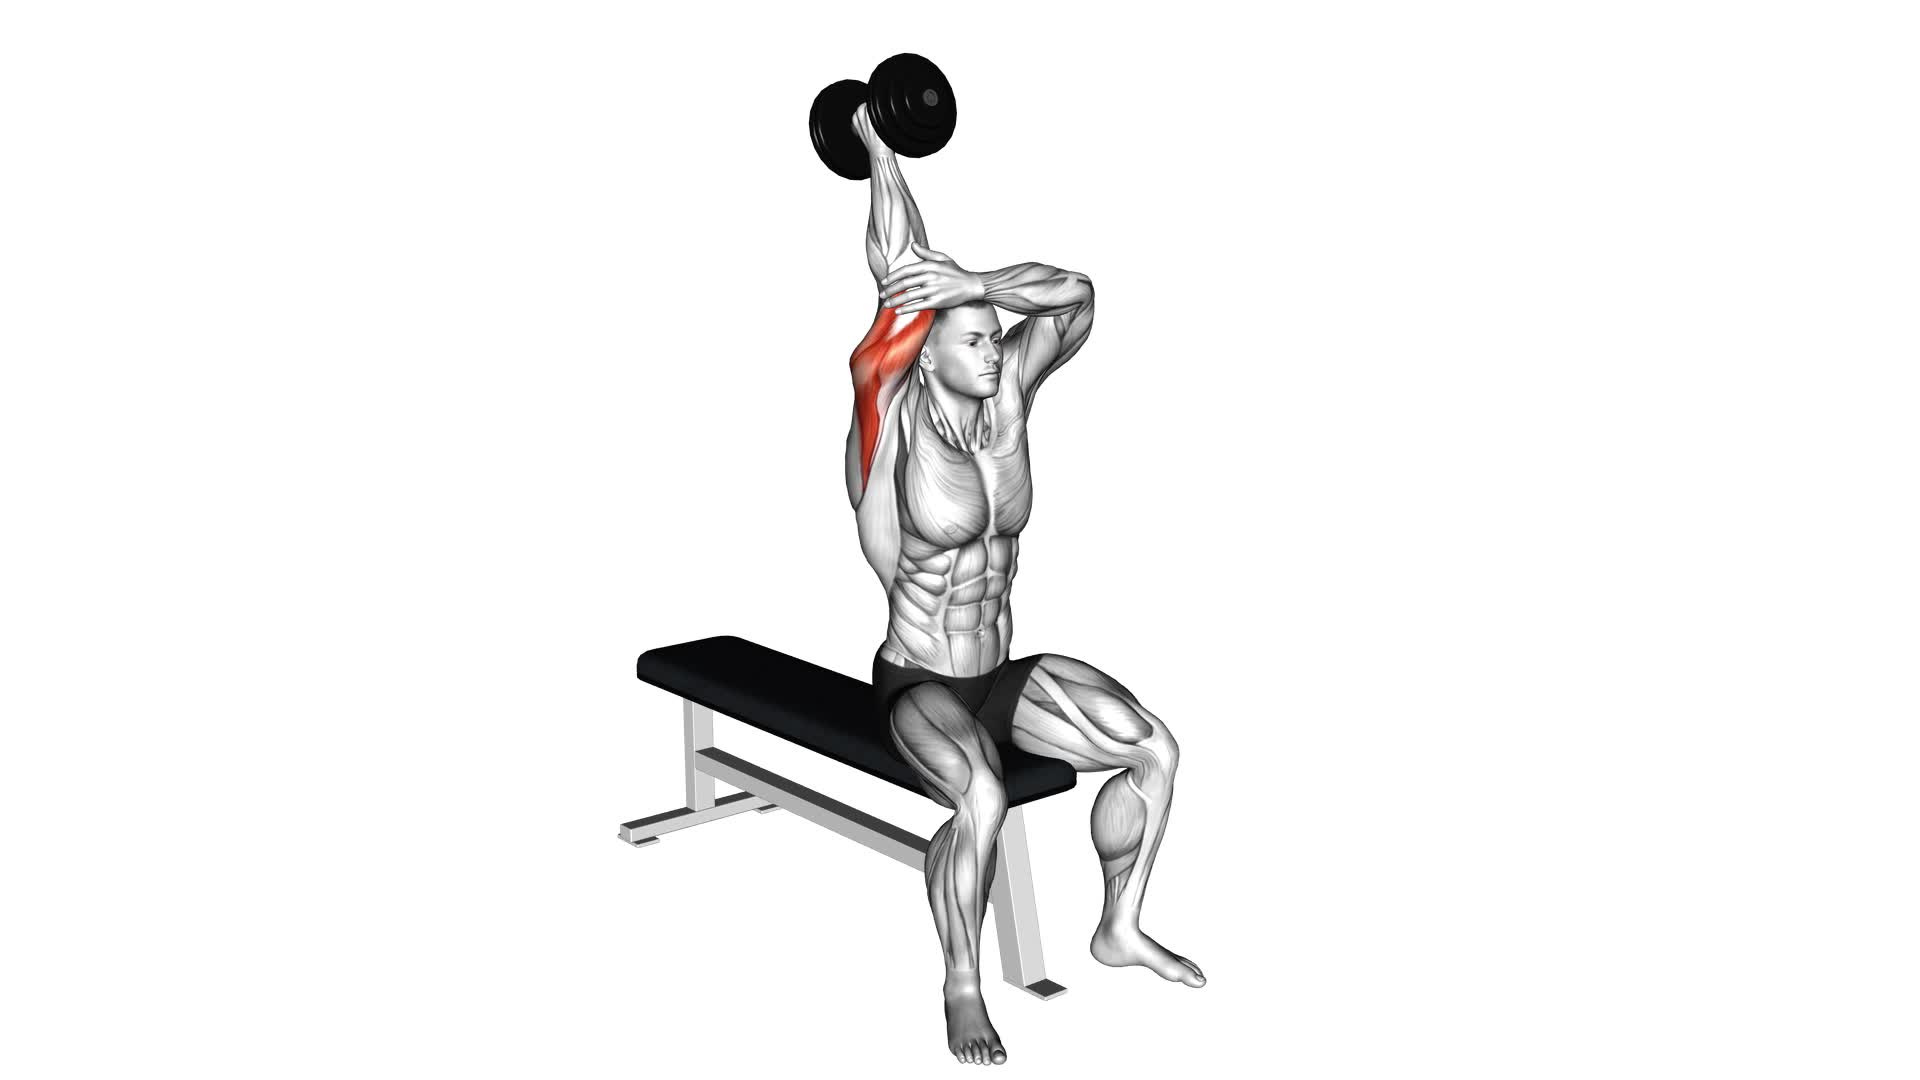 Dumbbell Seated Single Arm Overhead Triceps Extension - Video Exercise Guide & Tips